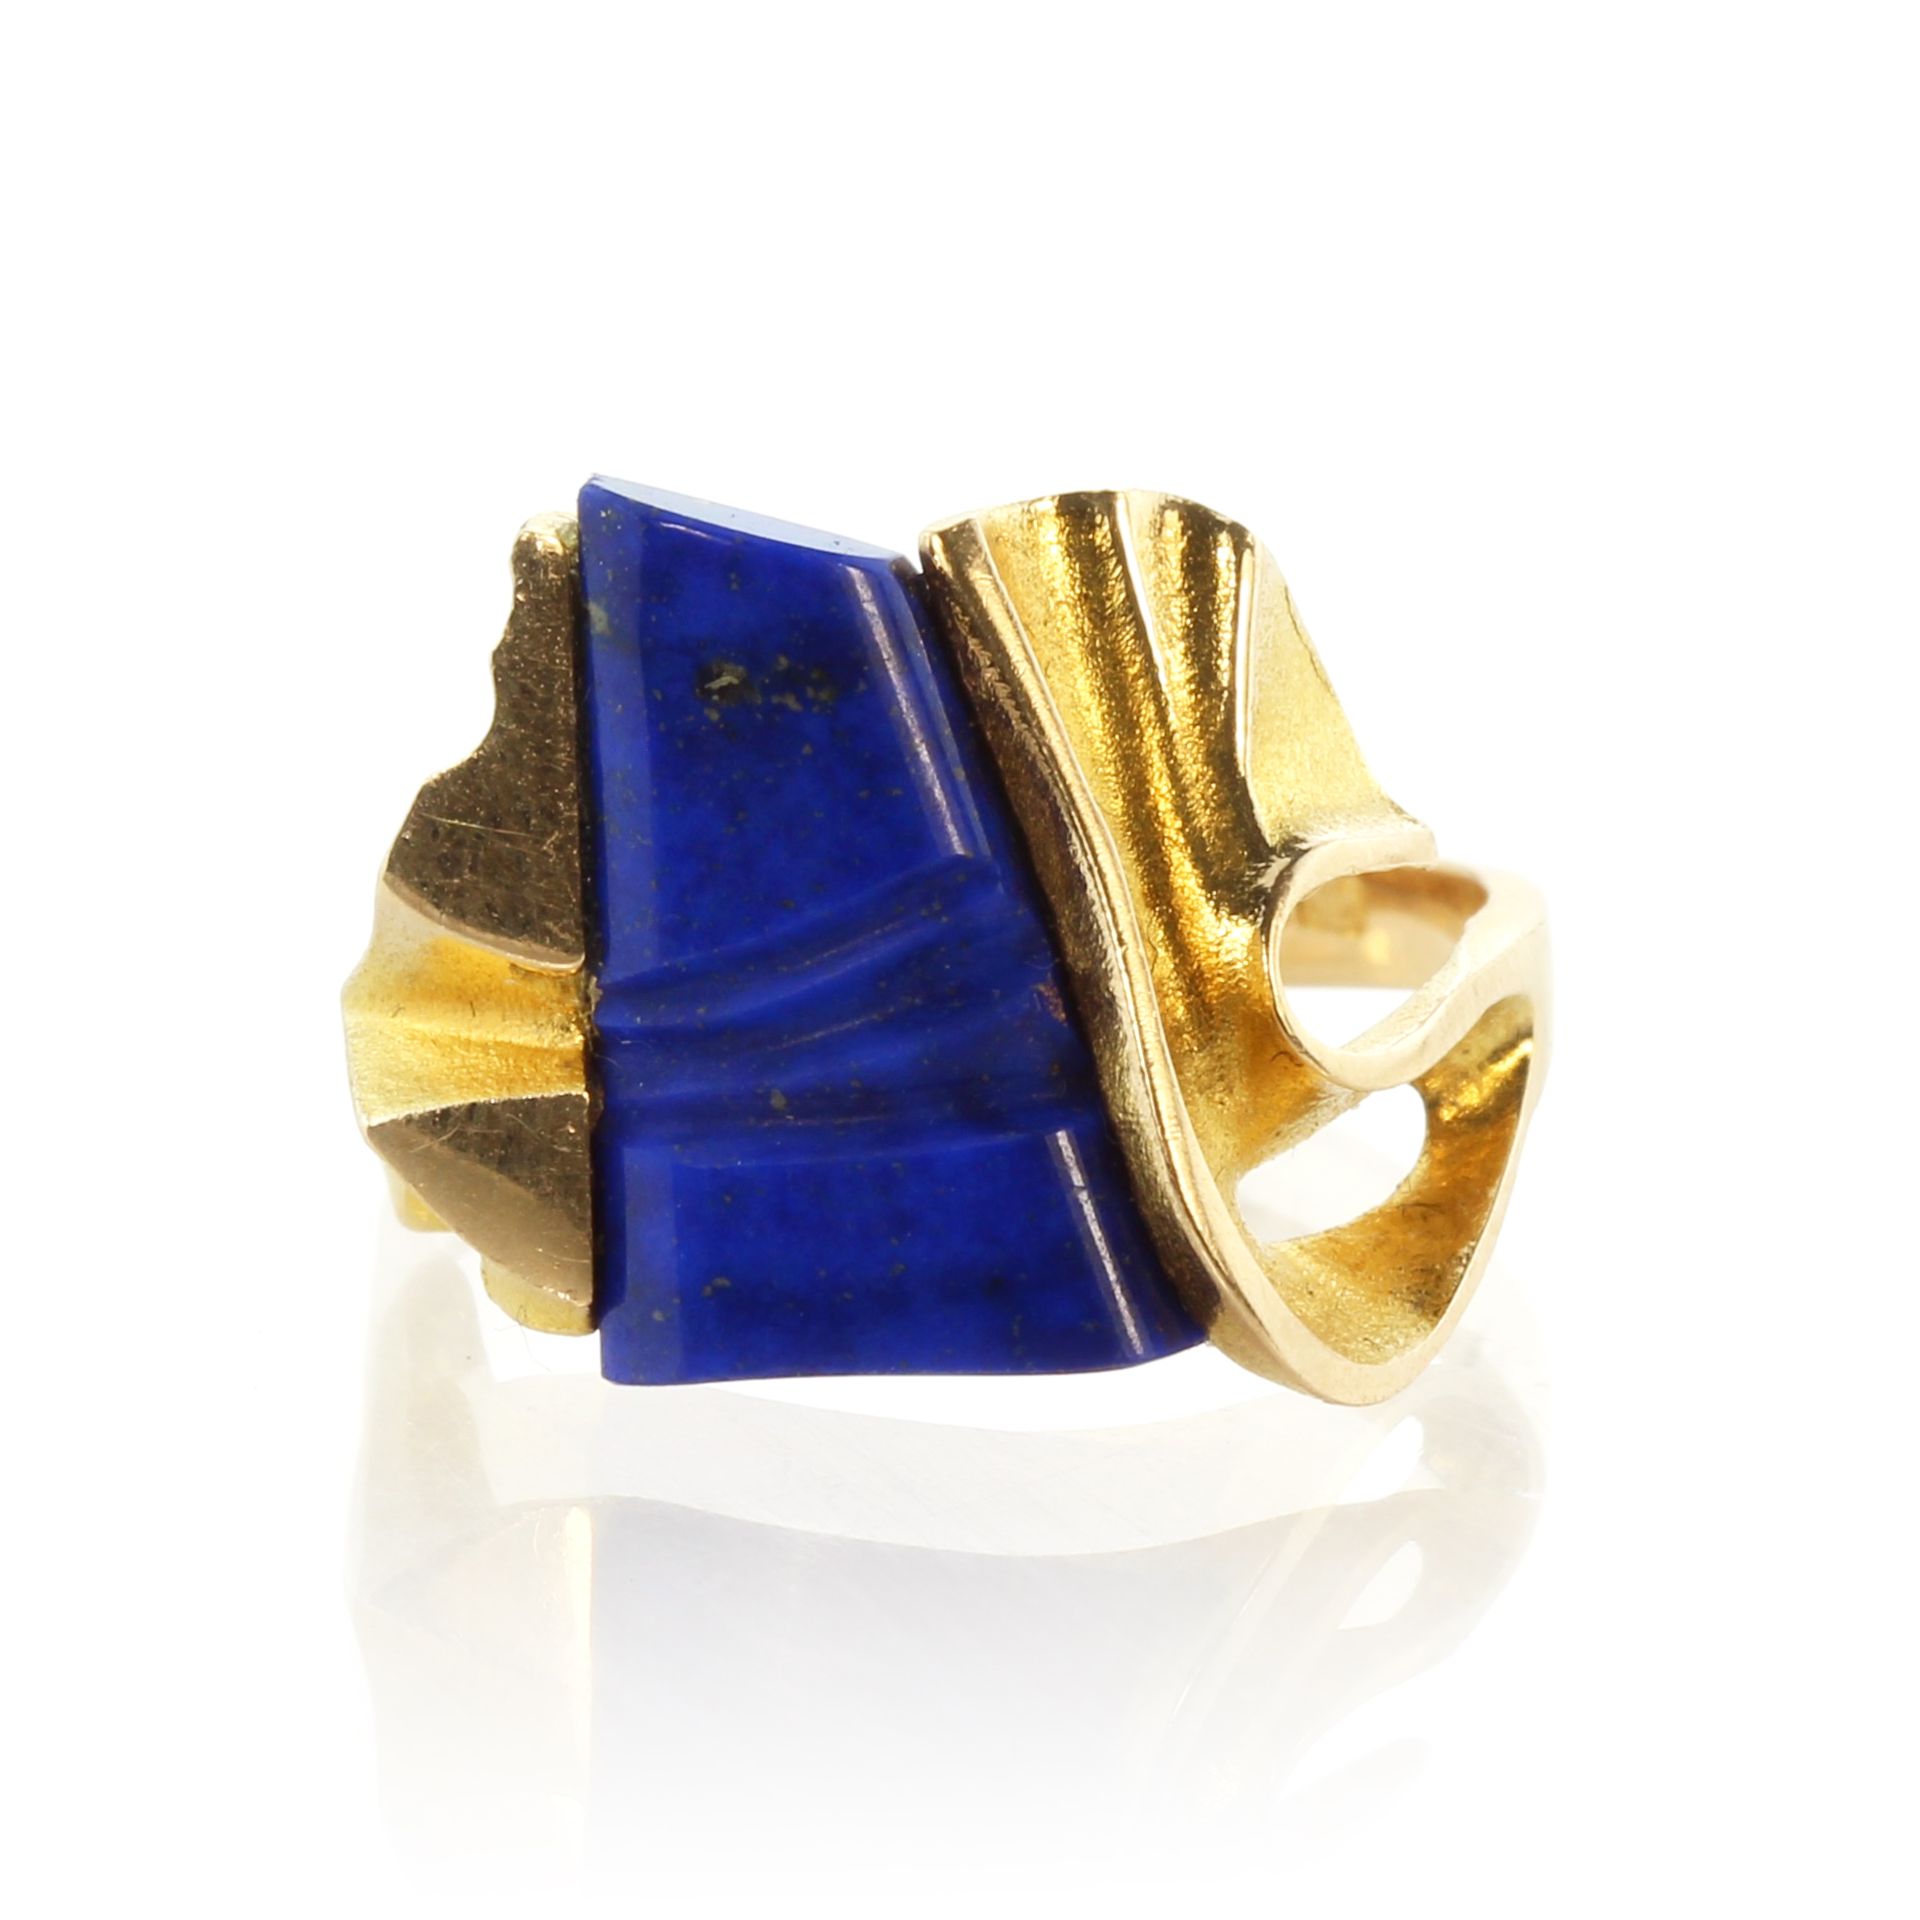 LAPPONIA A vintage lapis lazuli dress ring in 18ct yellow gold by Lapponia set with a carved panel